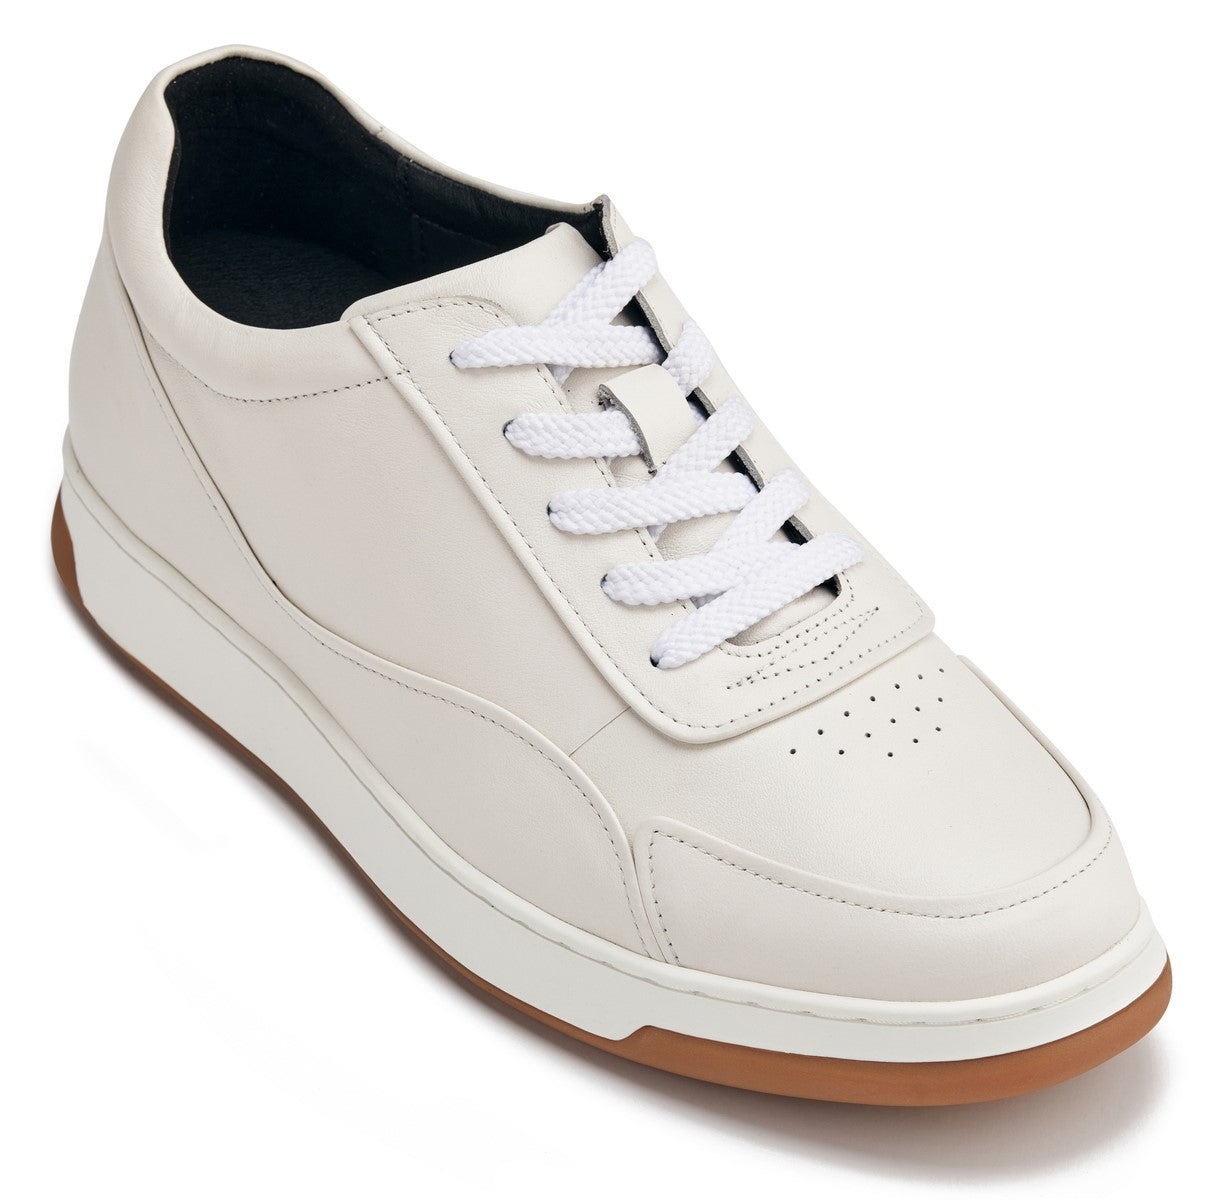 CALTO - Y7886 - 2.6 Inches Taller (Off-White/White & Gum Sole) - Elevated Leather Sneakers